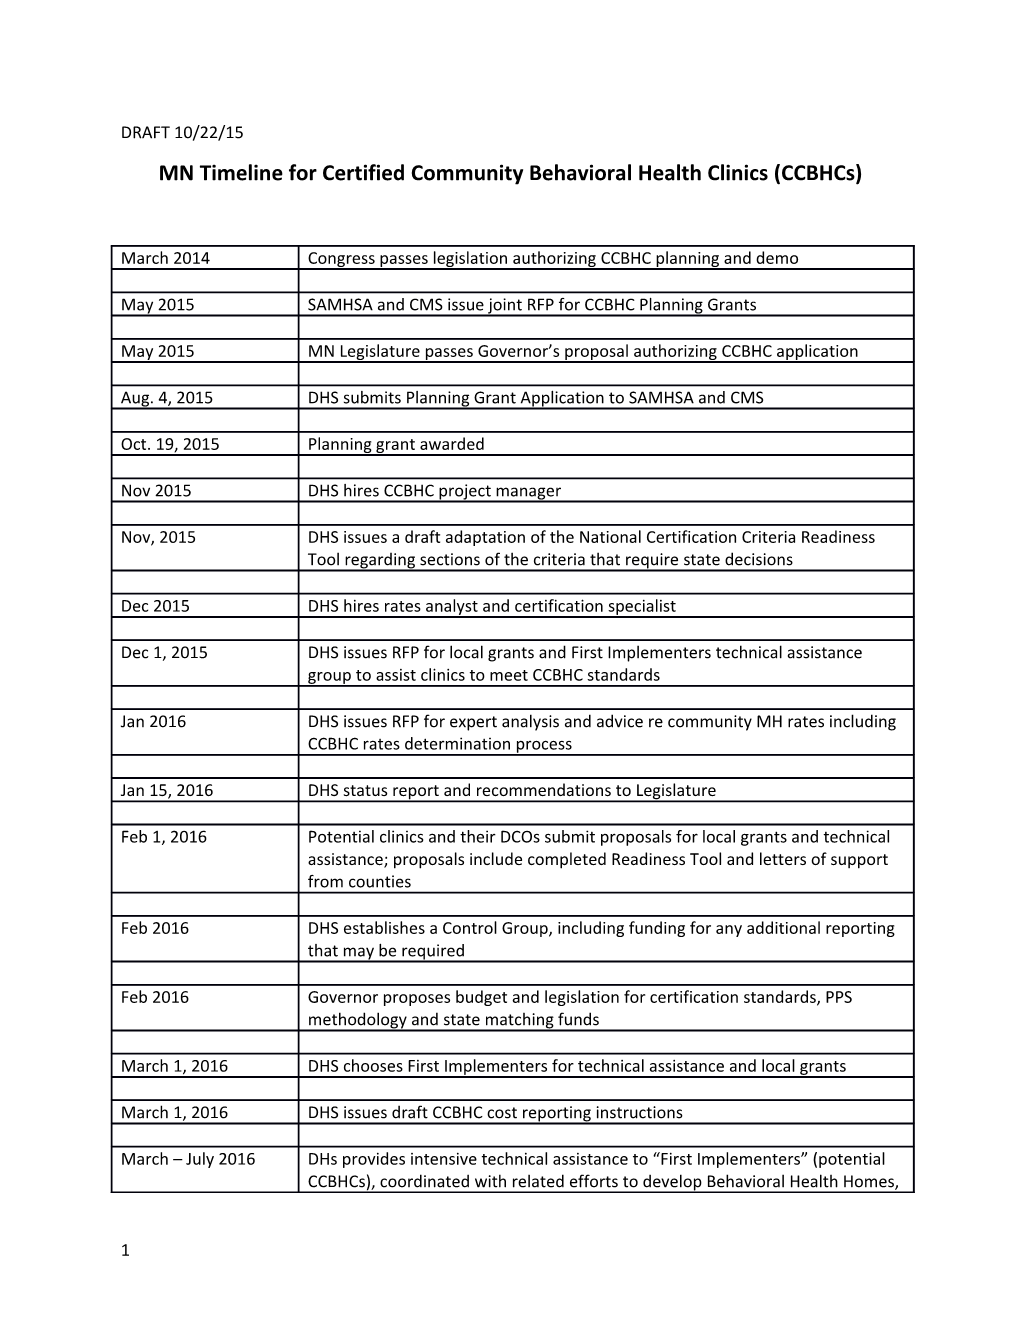 MN Timeline for Certified Community Behavioral Health Clinics (Ccbhcs)